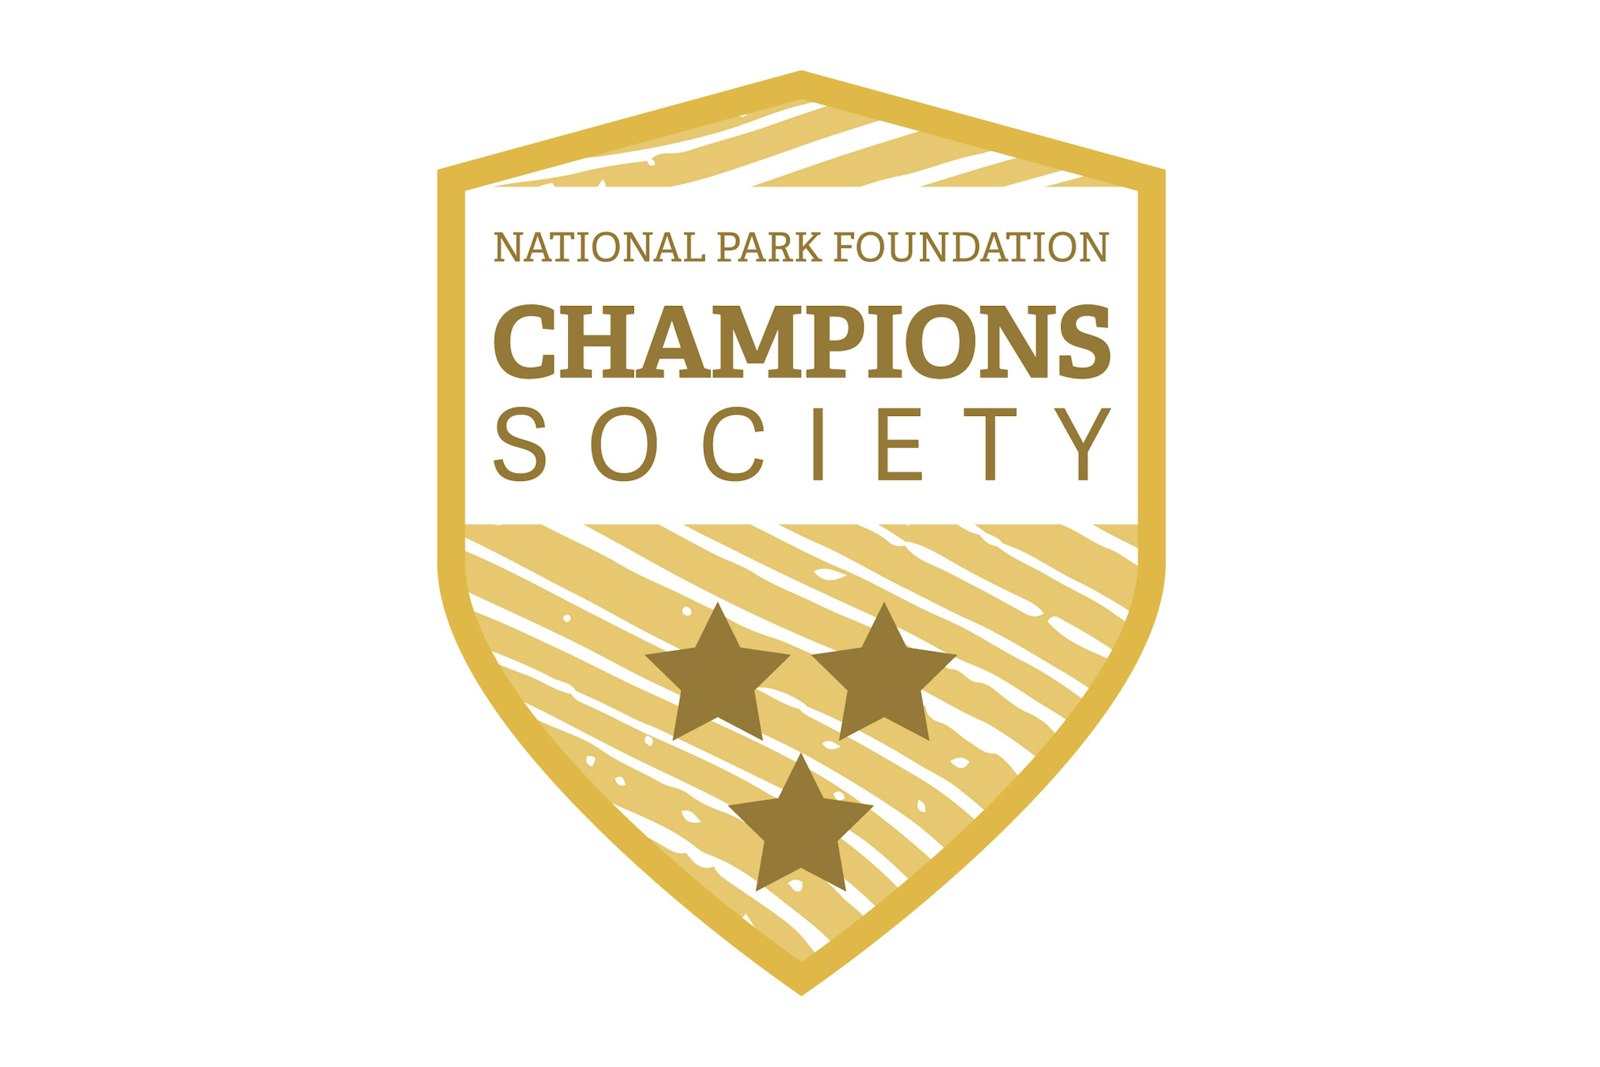 Illustration of a badge that reads "National Park Foundation, Champions Society" with 3 stars